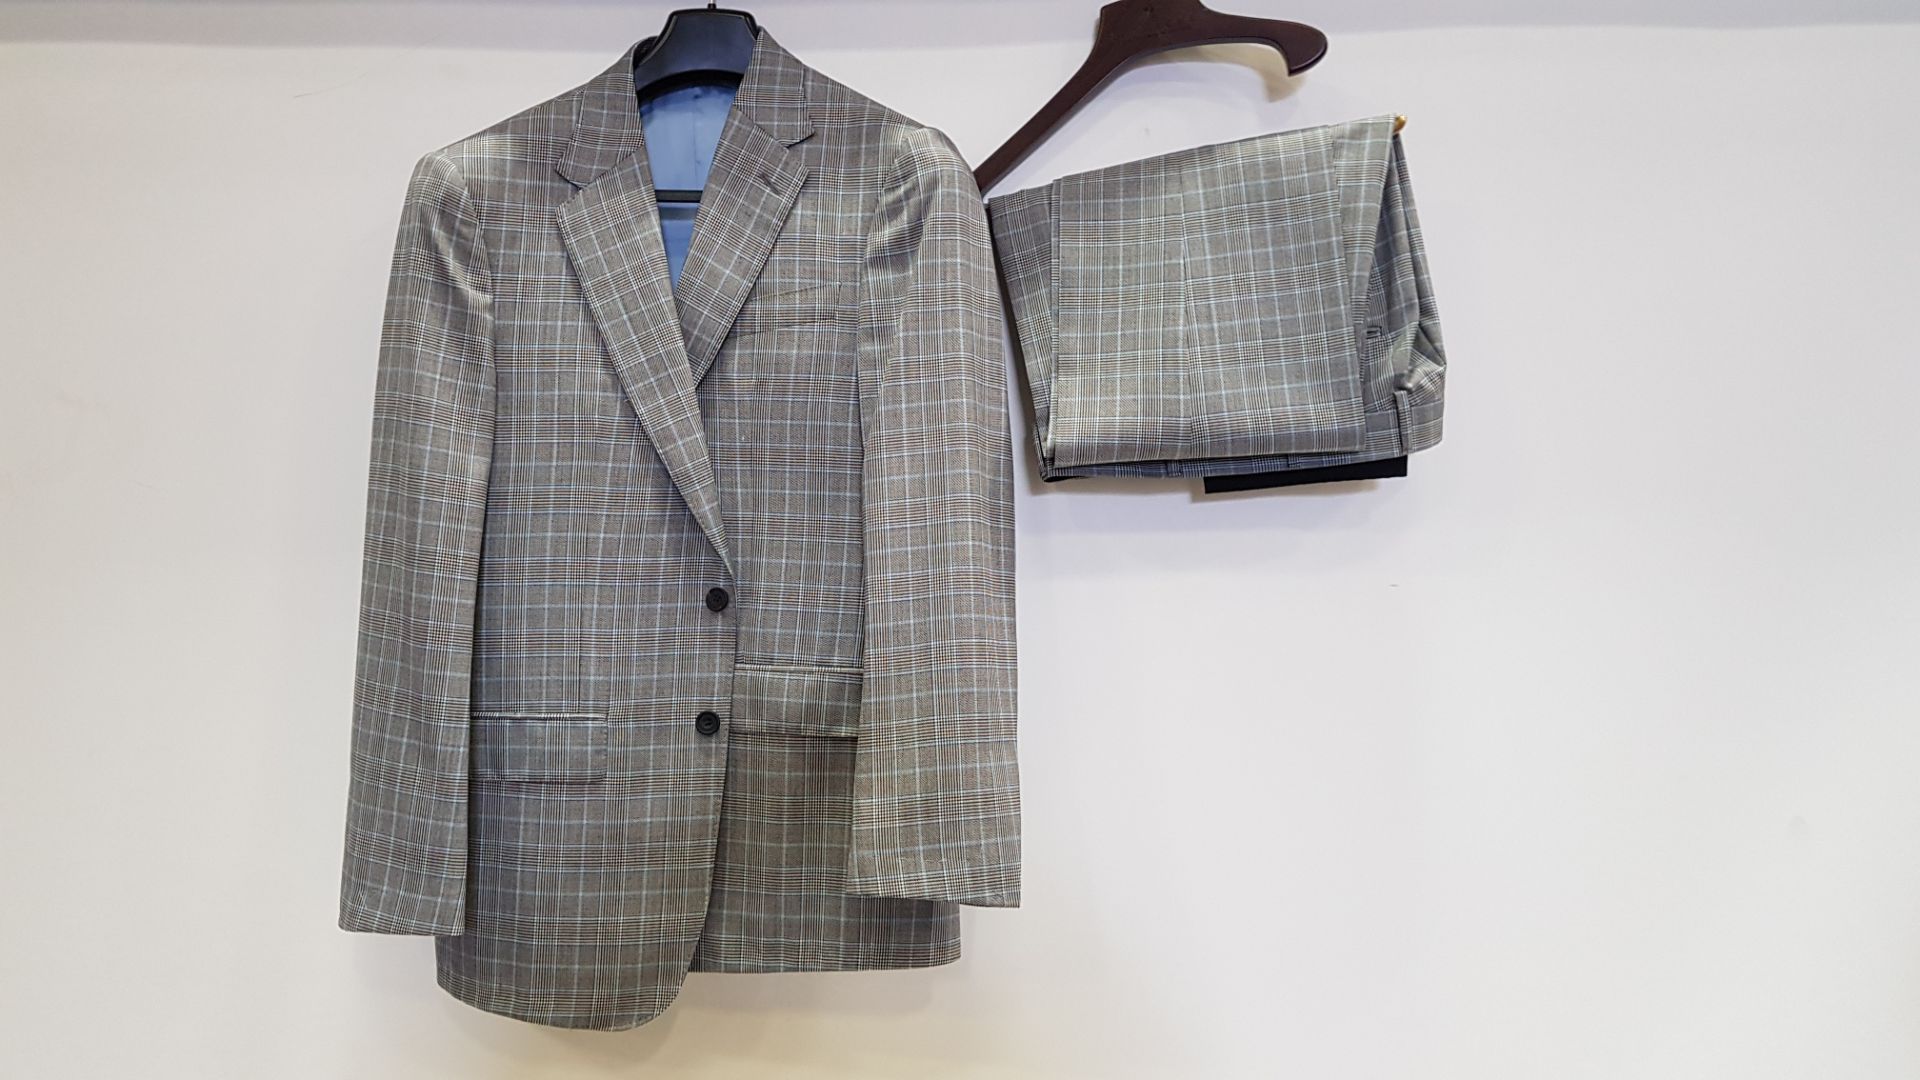 3 X BRAND NEW LUTWYCHE HAND TAILORED GREY AND BLUE CHEQUERED SUITS SIZE 40R, 42L AND 50L (PLEASE